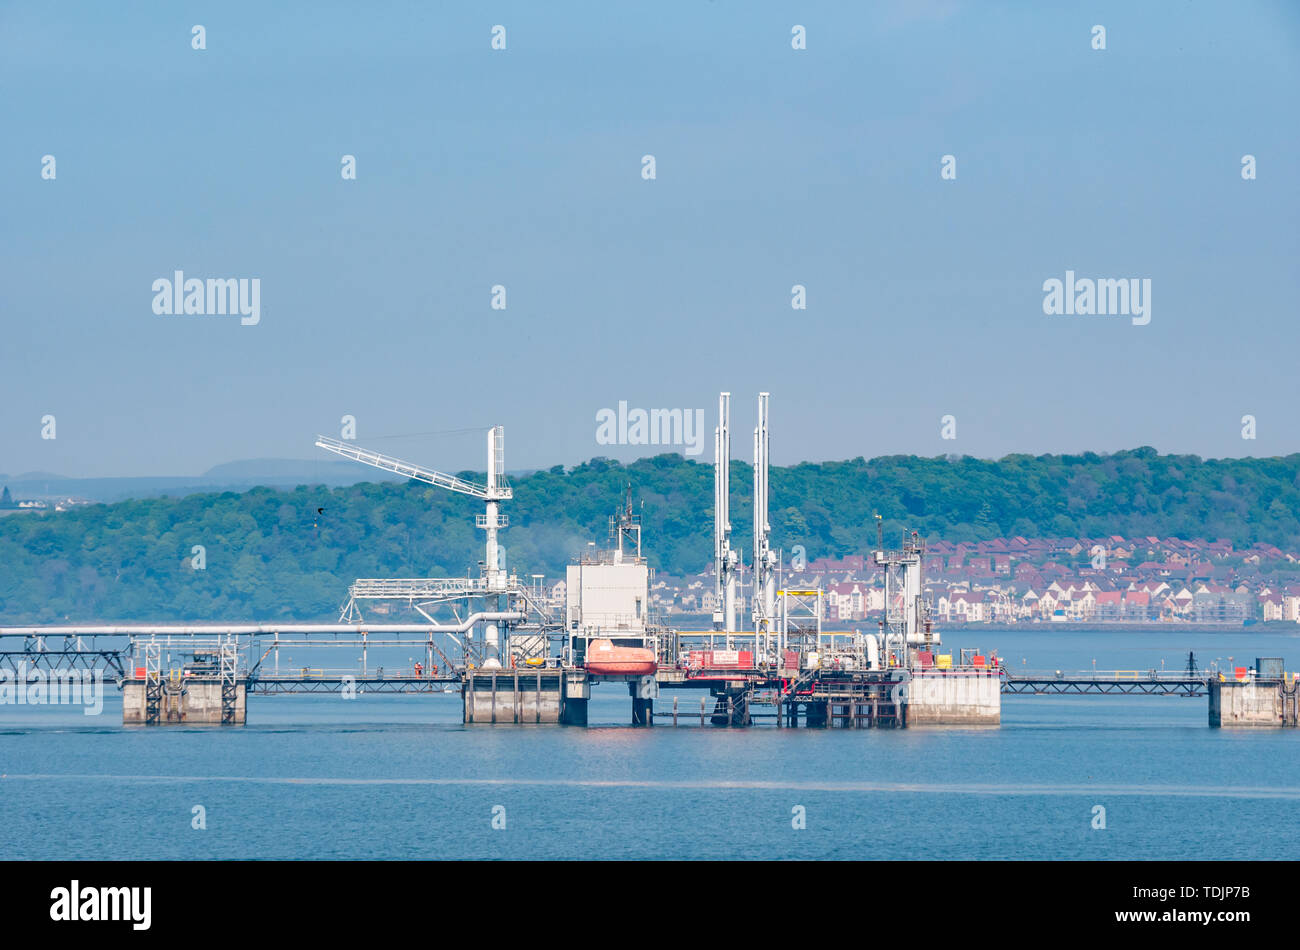 Hound Point industrial marine terminal for oil industry, Firth of Forth, Scotland, UK Stock Photo